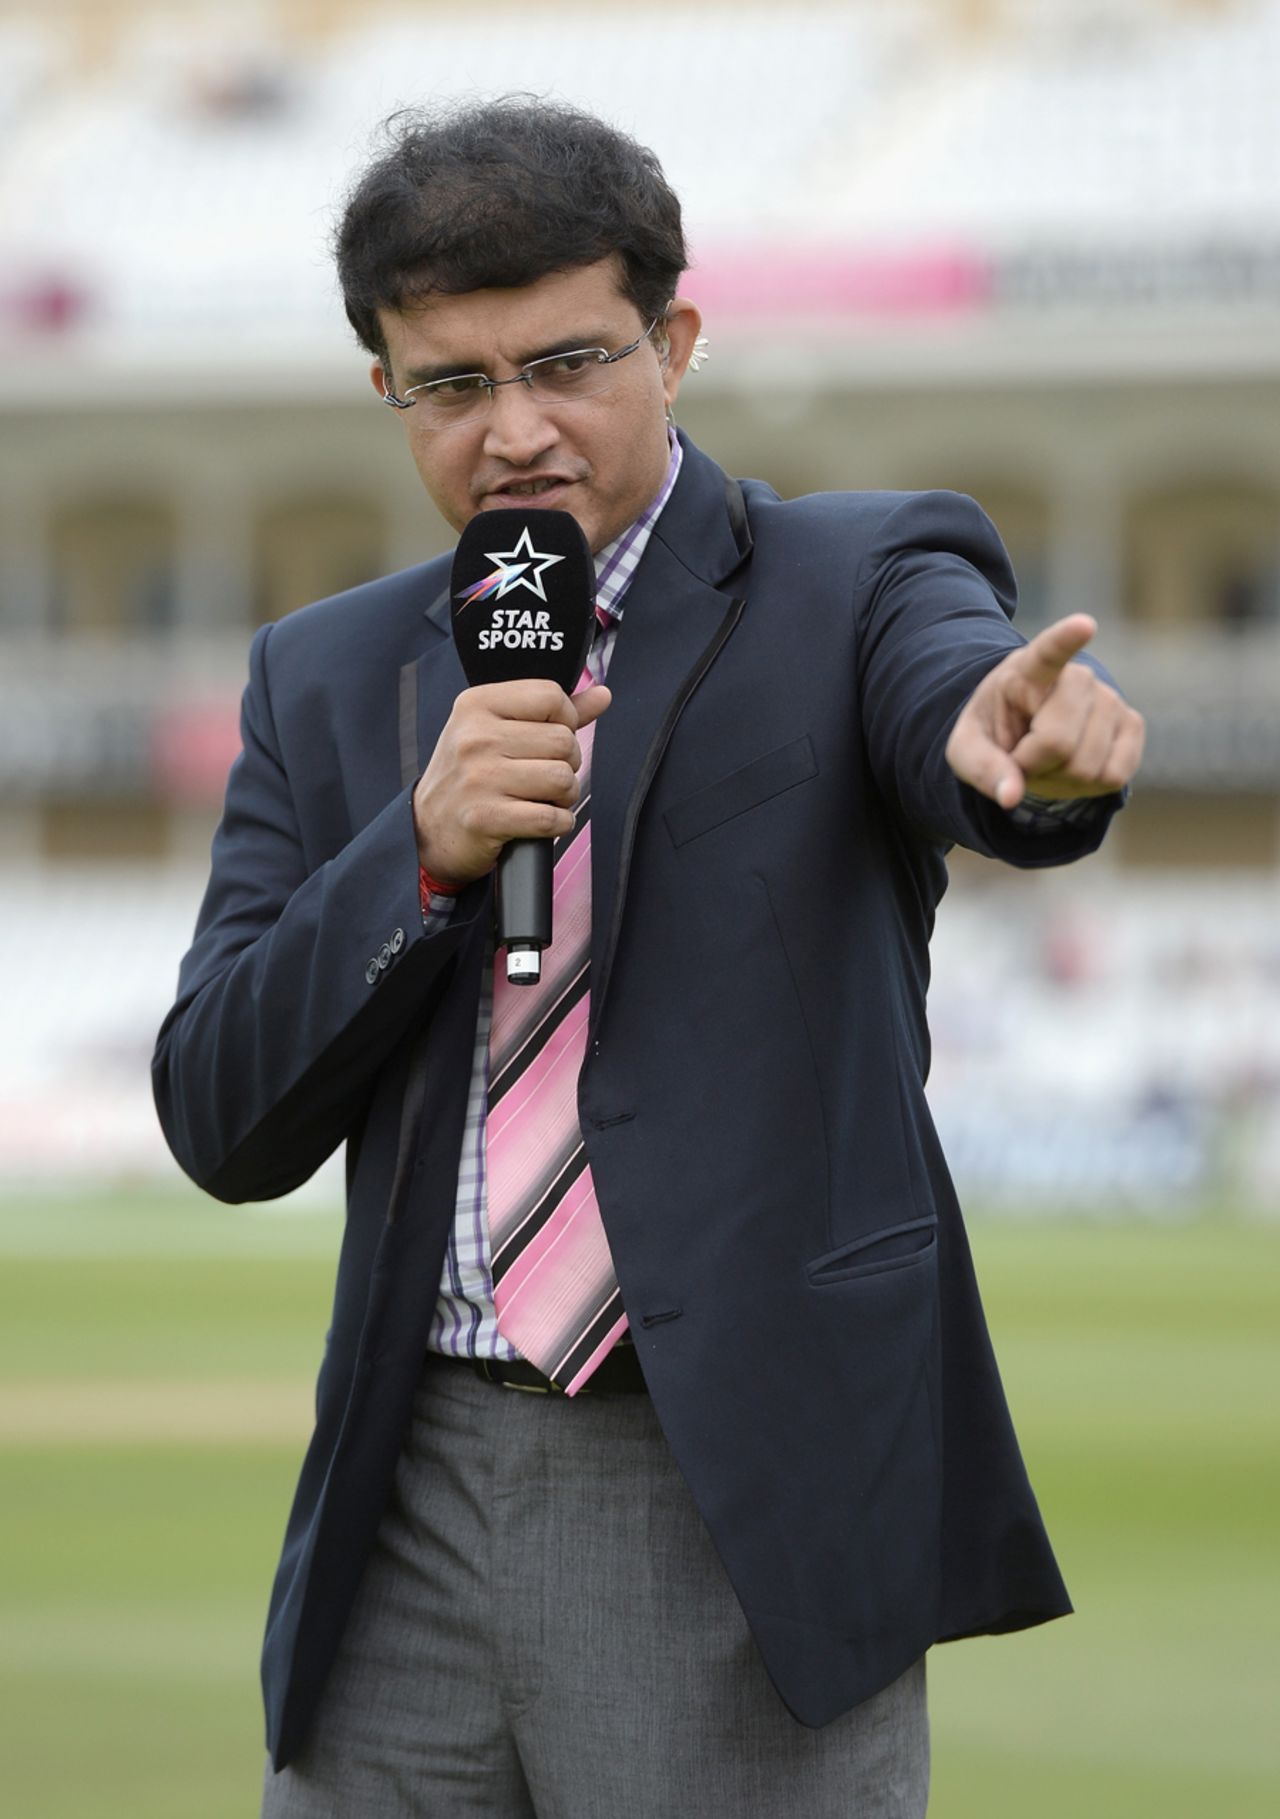 Sourav Ganguly speaks on TV ahead of day three, first Test, England v India, Trent Bridge, July 11, 2014